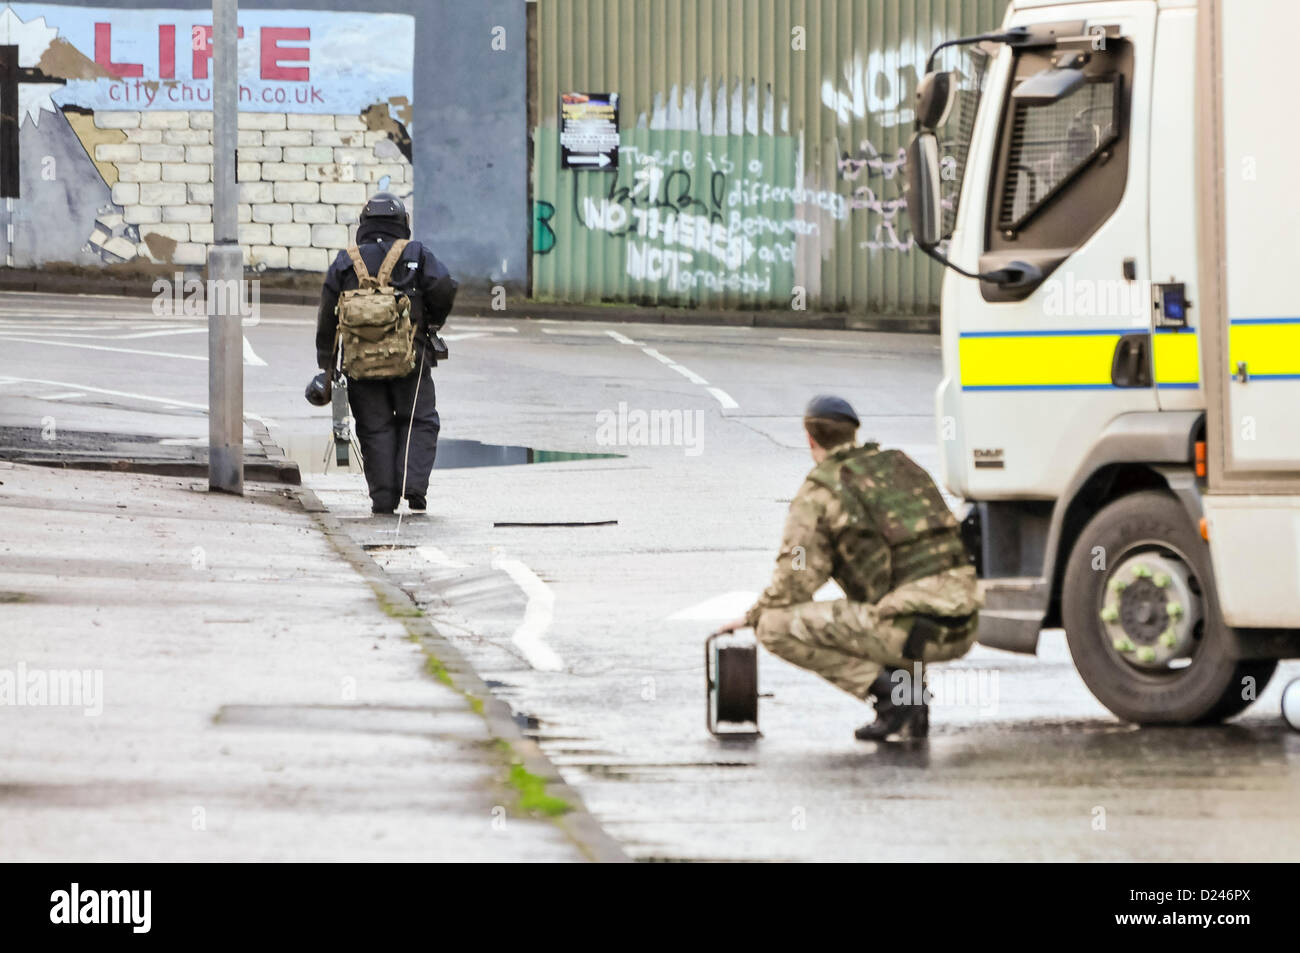 Belfast, Northern Ireland, UK. 14th January 2013.   Army ATO from 321 Squadron, 11 EOD Regiment, dressed in a bomb-proof suit walks towards a suspect device carrying a controlled explosion 'pig stick'. His colleague holds a cable reel for the detonation cord. Stock Photo